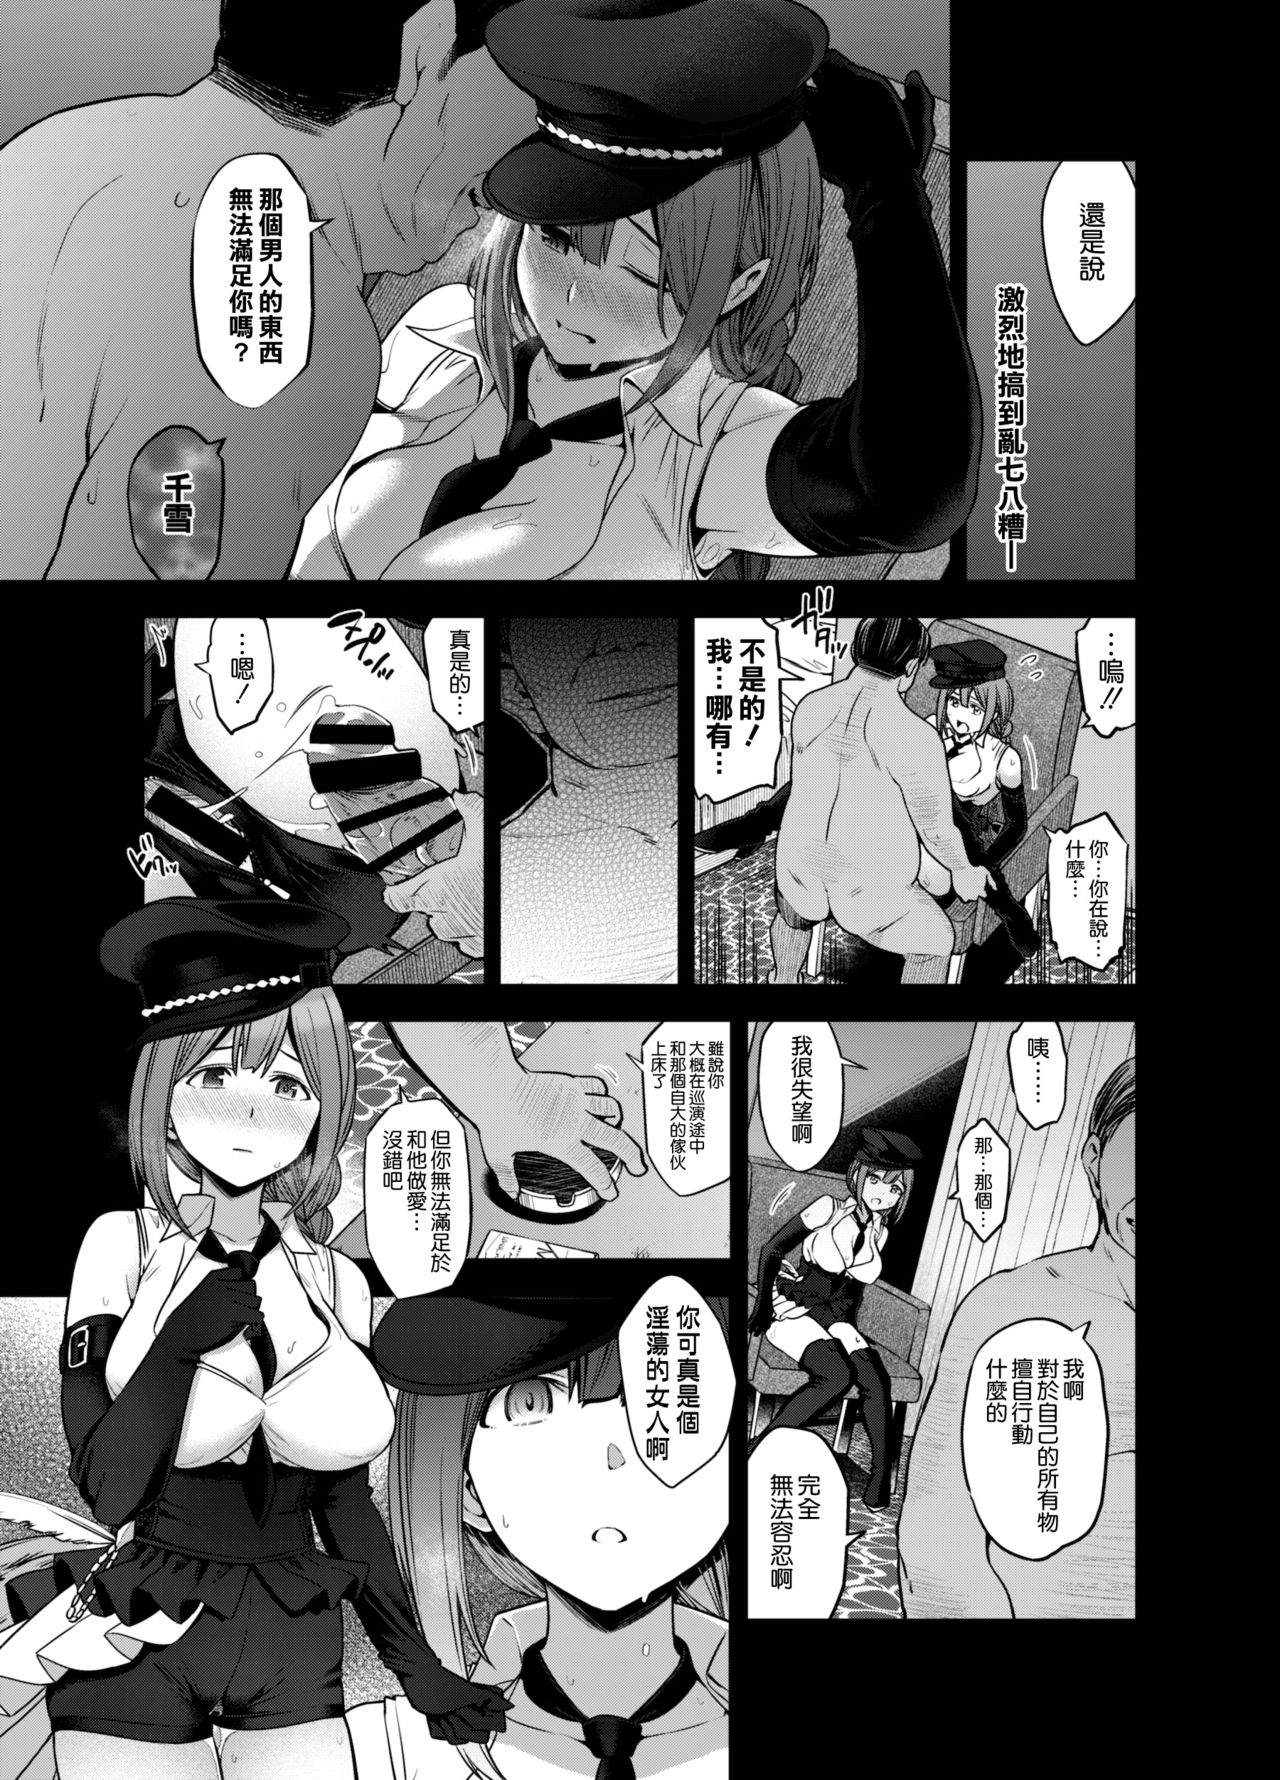 [SMUGGLER (Kazuwo Daisuke)] Late Night Blooming (THE iDOLM@STER: Shiny Colors) [Chinese] [空気系☆漢化] [Digital] page 23 full